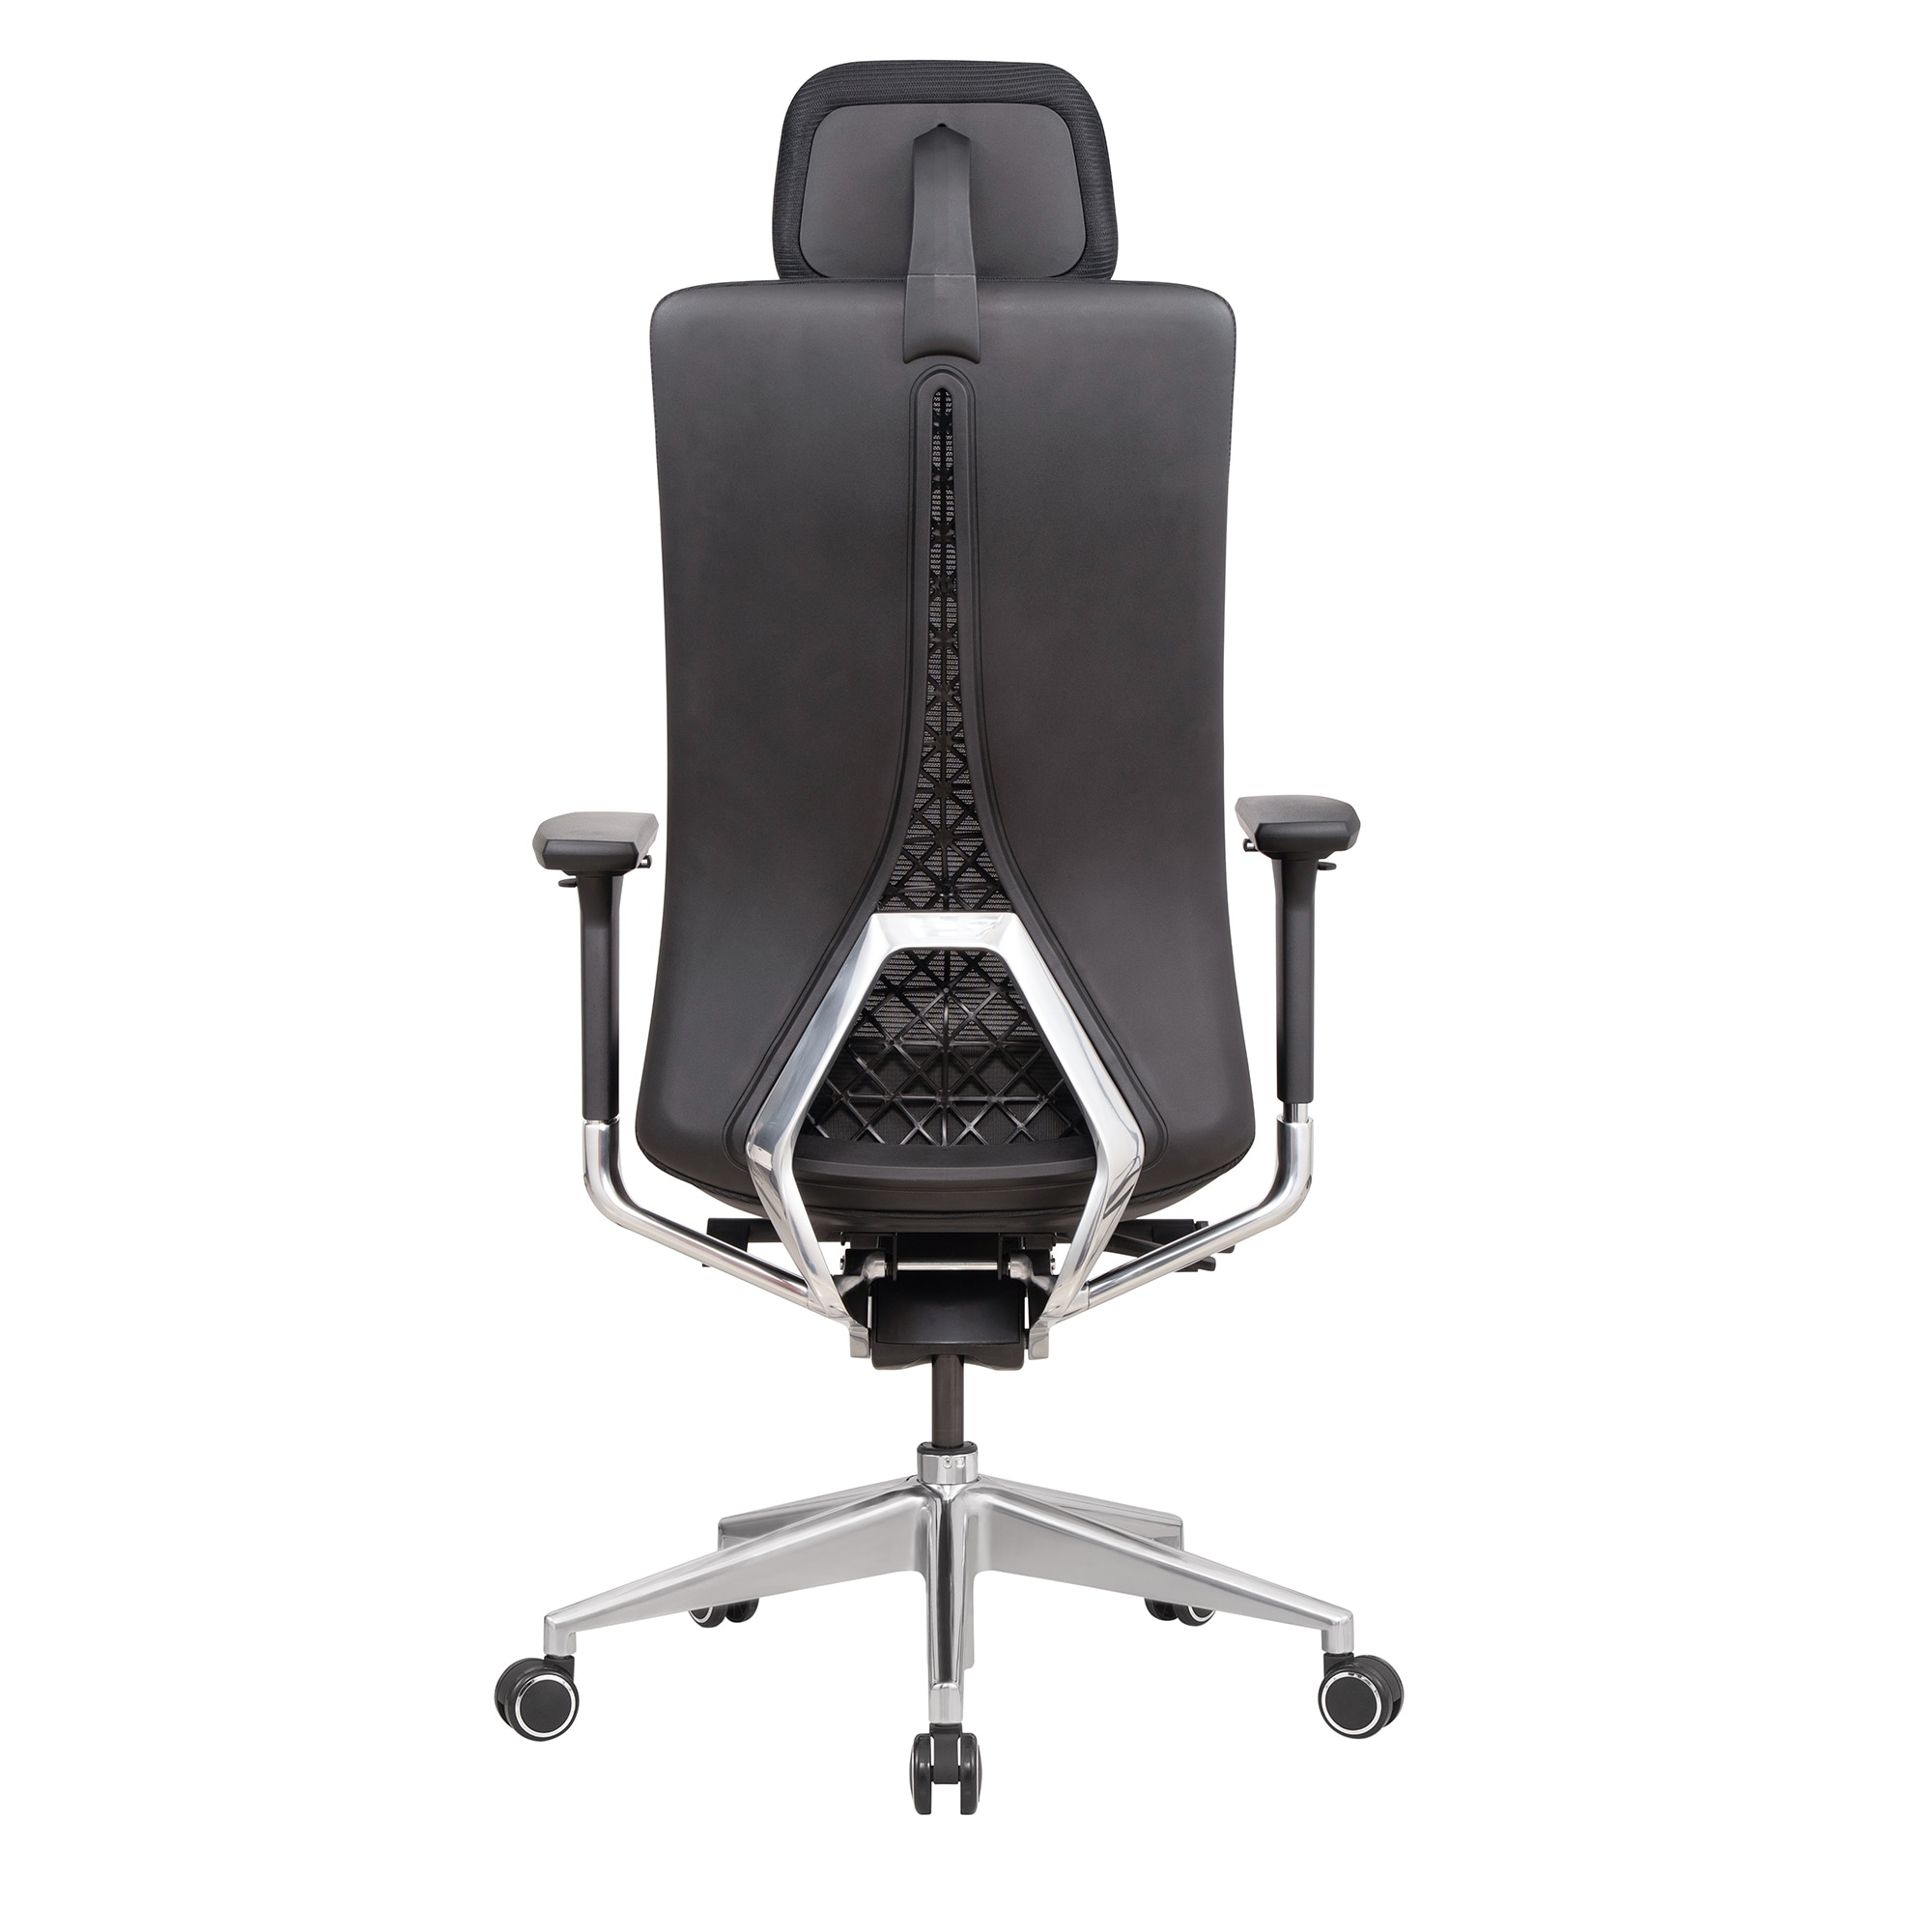 https://ak1.ostkcdn.com/images/products/is/images/direct/ffd823964974f1a6c11890dd0a801e13164f17de/Lanbo-Ergonomic-Office-Chair-with-Adjustable-Headrest%2C-28.3*23.2*52.4.jpg